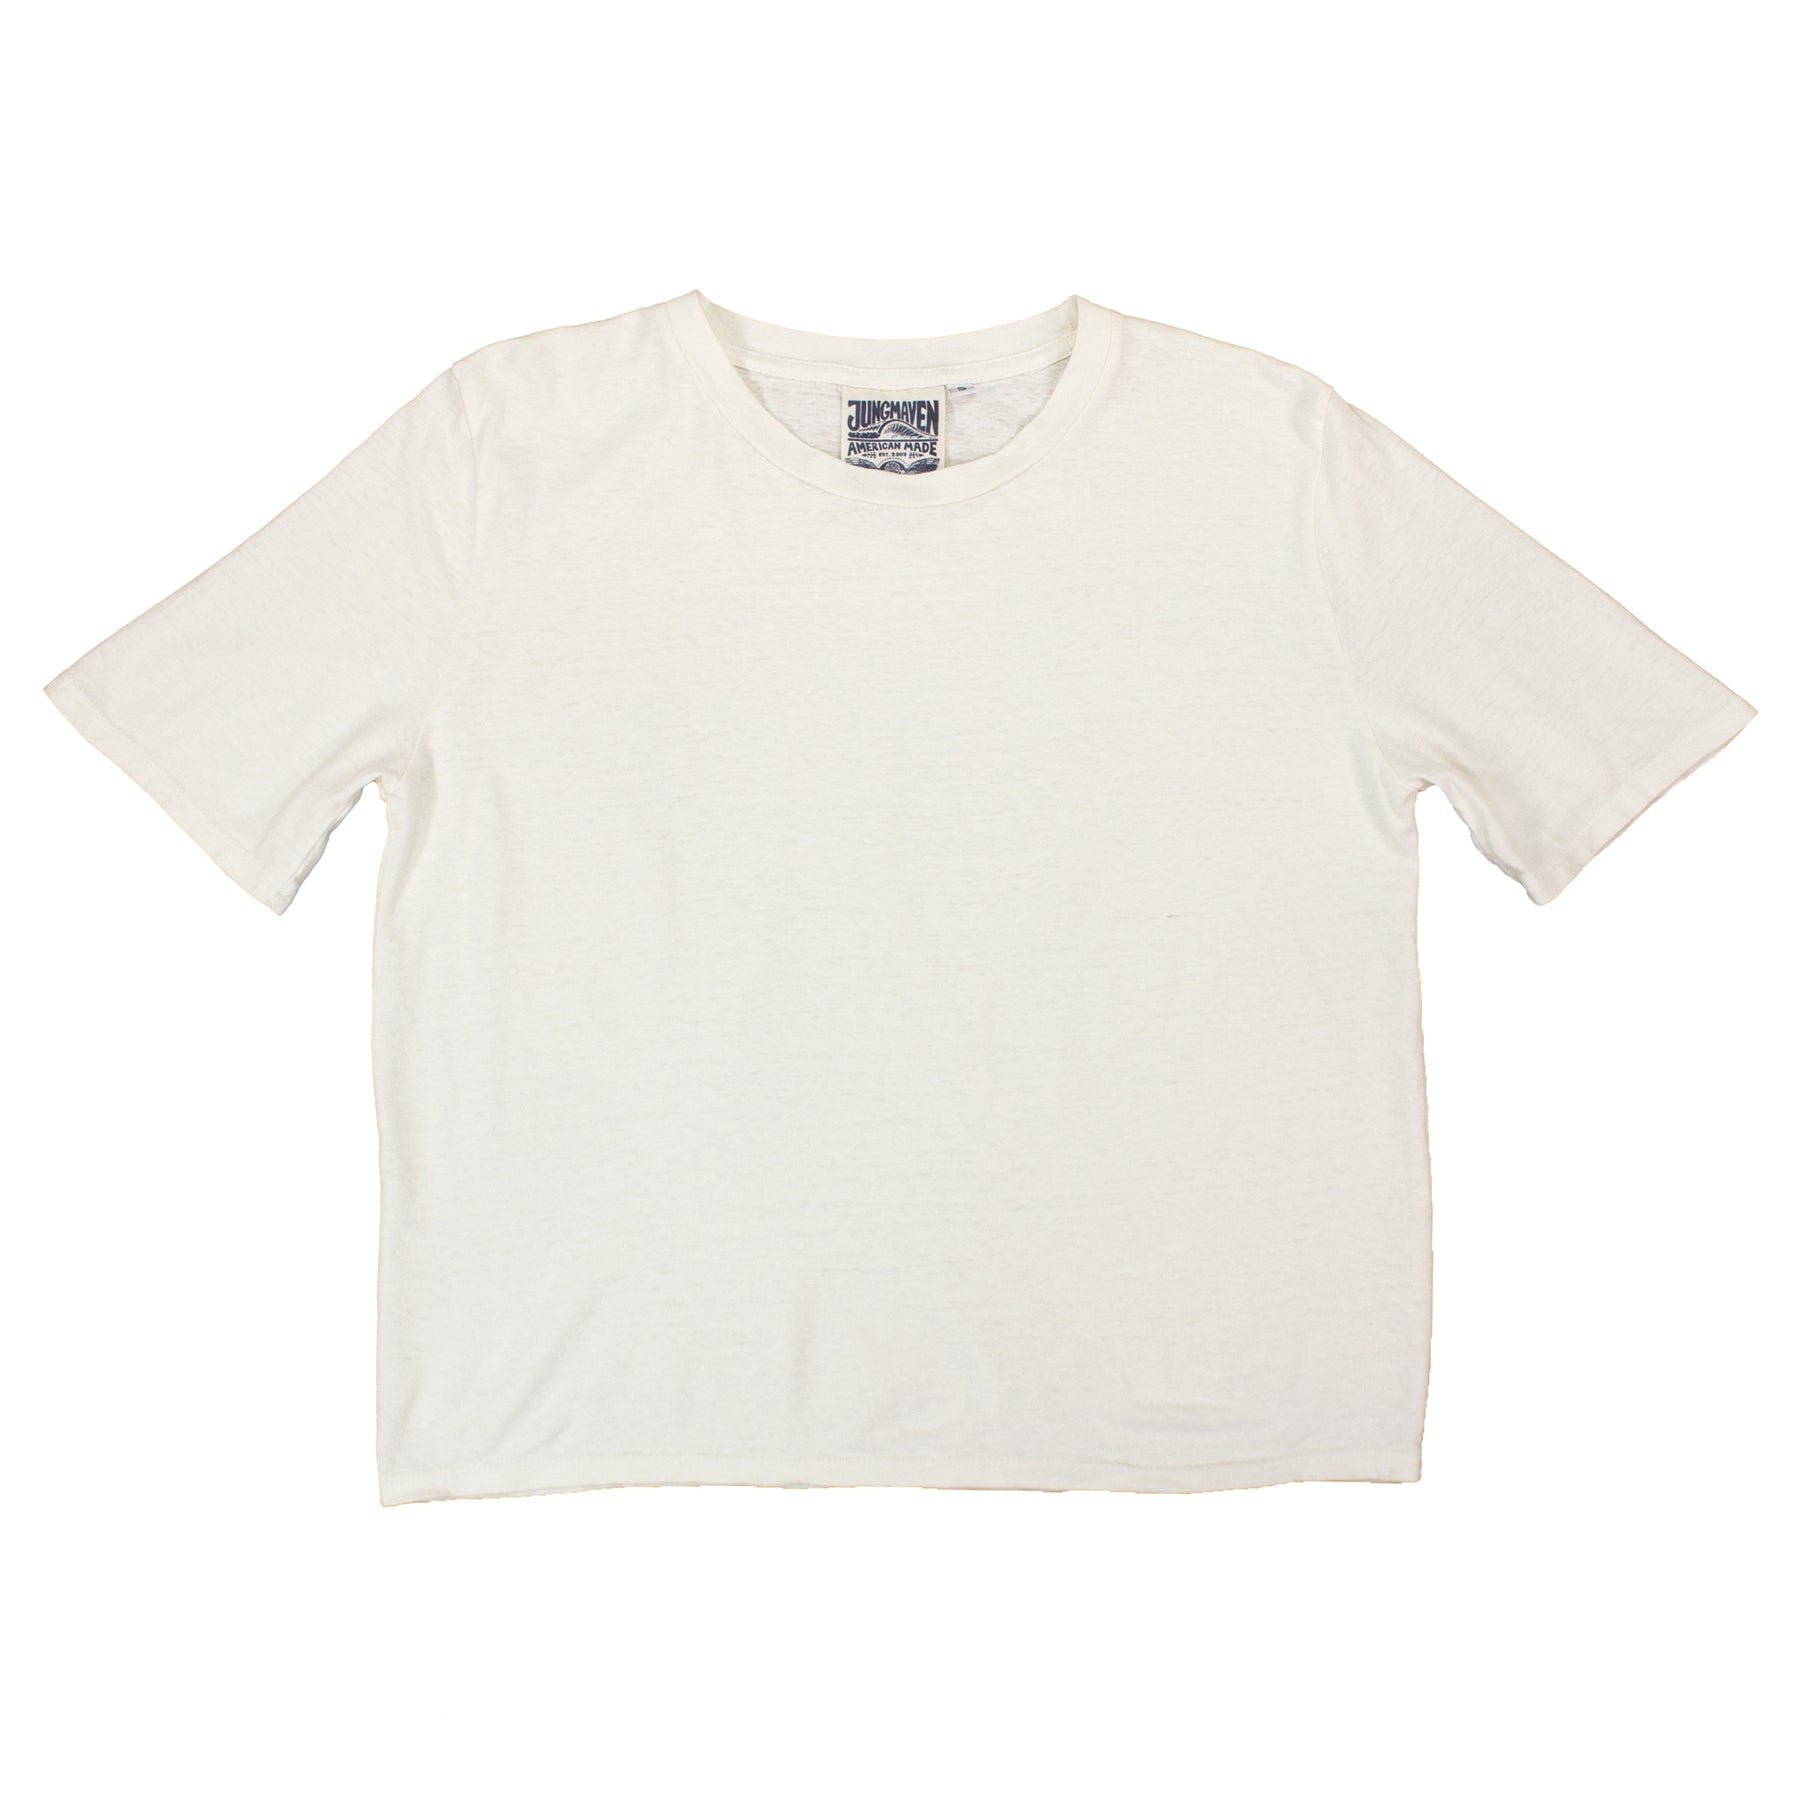 Silverlake Cropped Tee In Washed White By Jungmaven